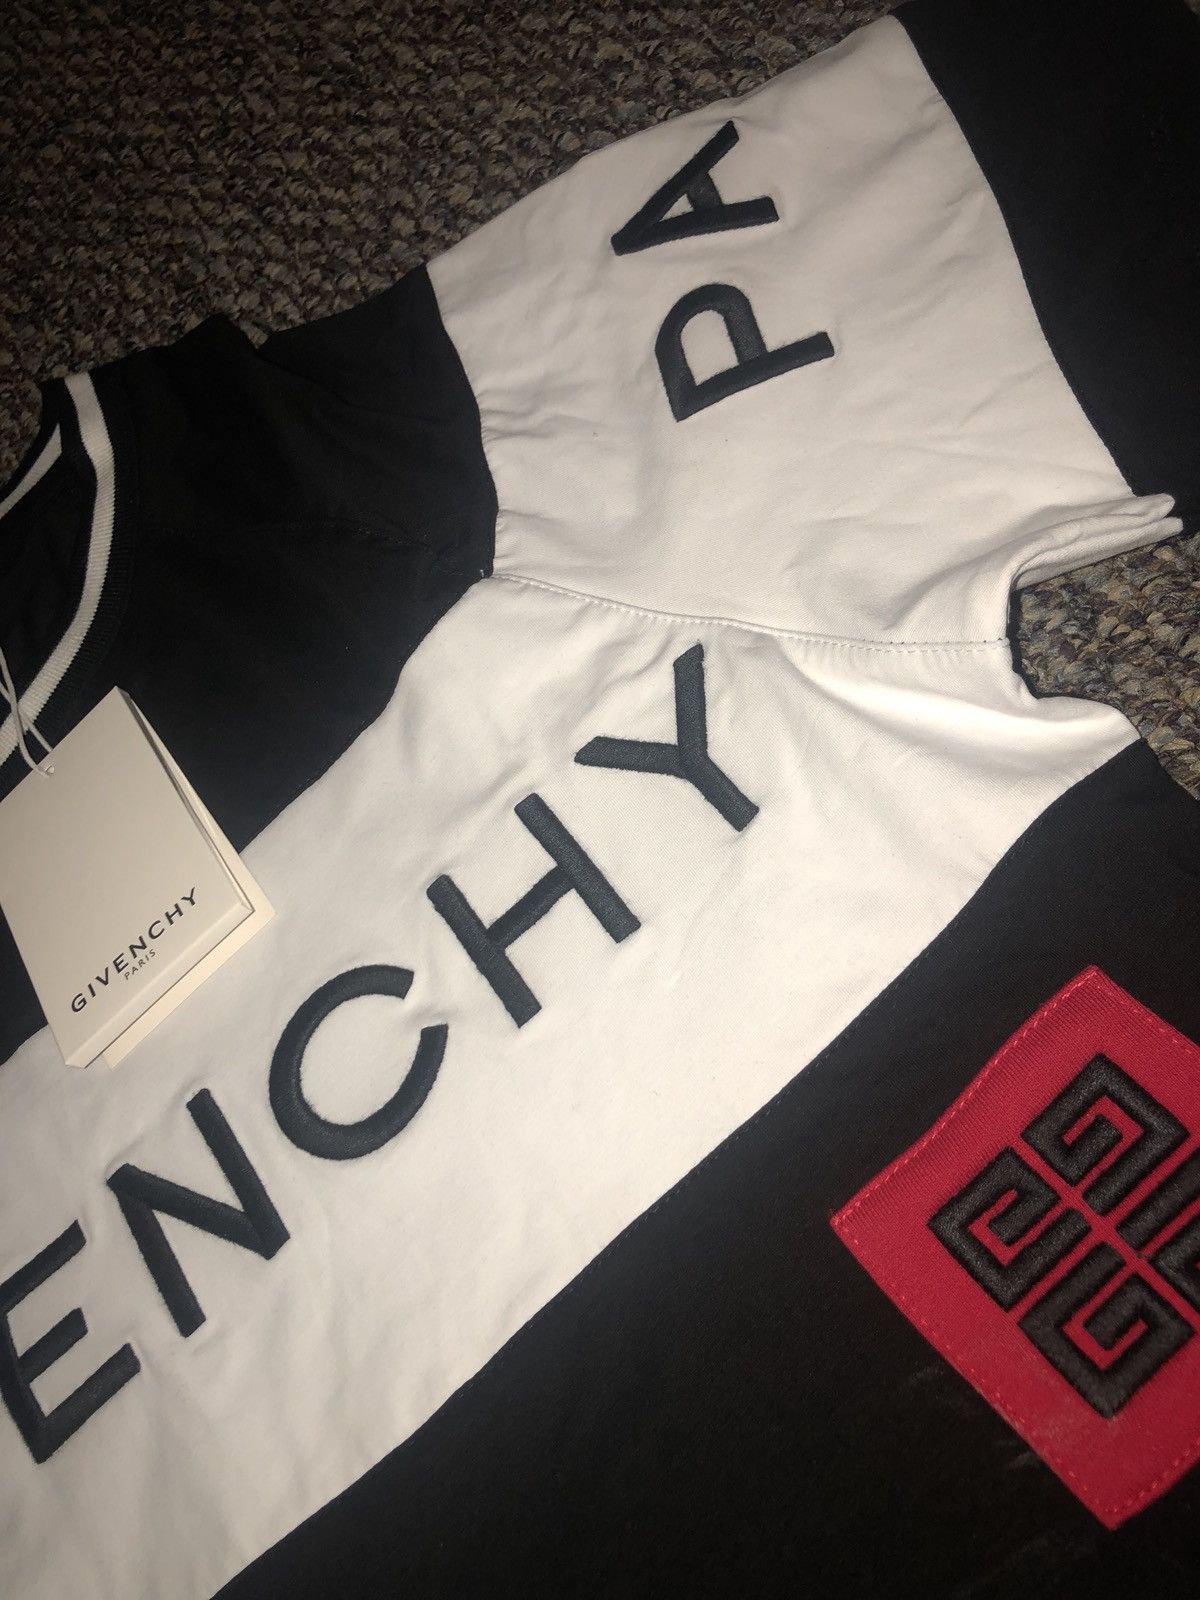 Givenchy GIVENCHY PARIS 4G EMBROIDERED T-SHIRT Size US S / EU 44-46 / 1 - 3 Preview